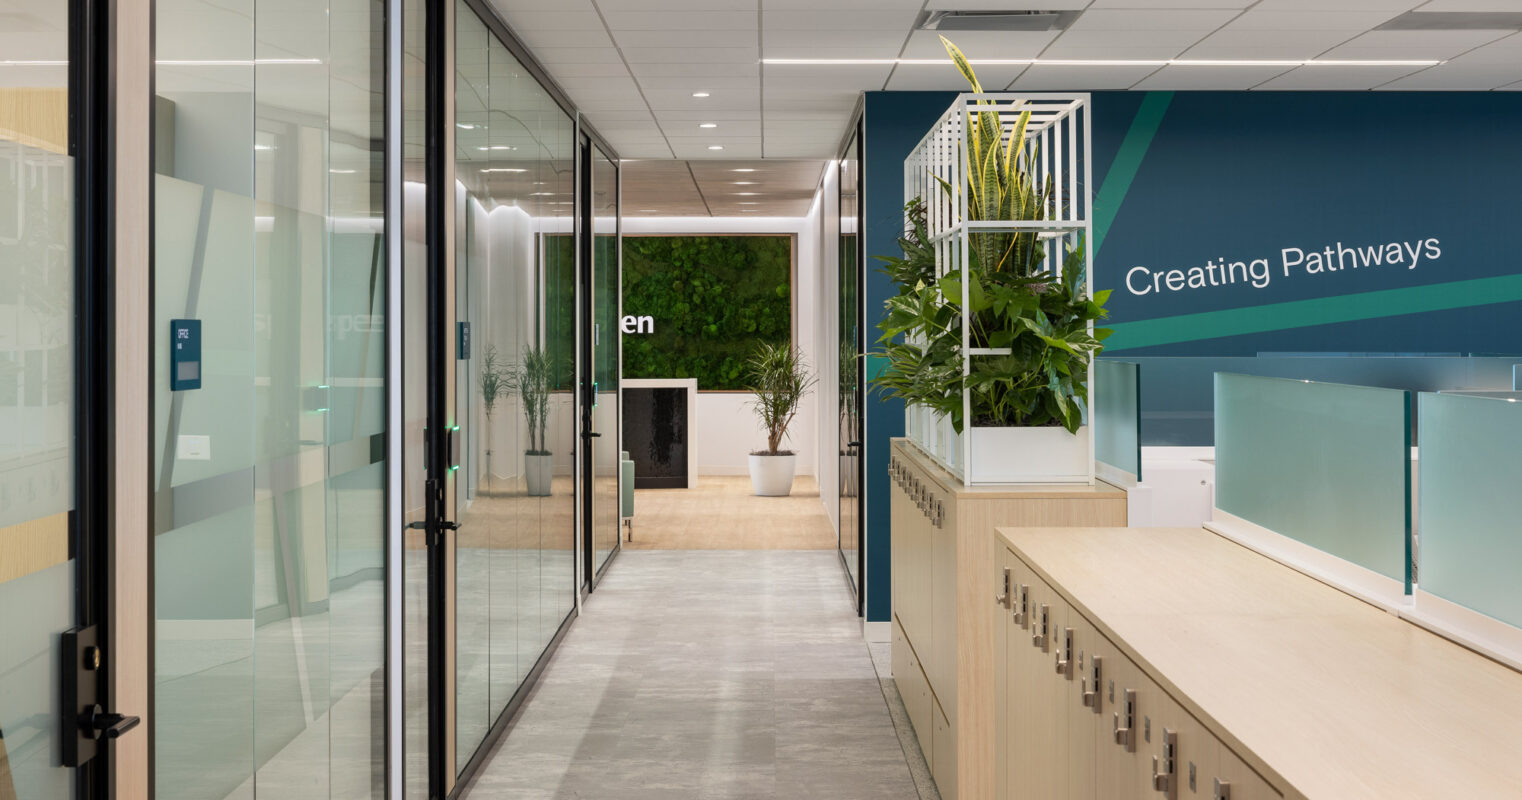 Modern office corridor with sleek glass partitions, reflecting a functional yet aesthetically pleasing design. A neutral color palette is complemented by a vibrant teal accent wall, inscribed with motivational text. Potted greenery adds a touch of nature, enhancing the workspace's ambiance.